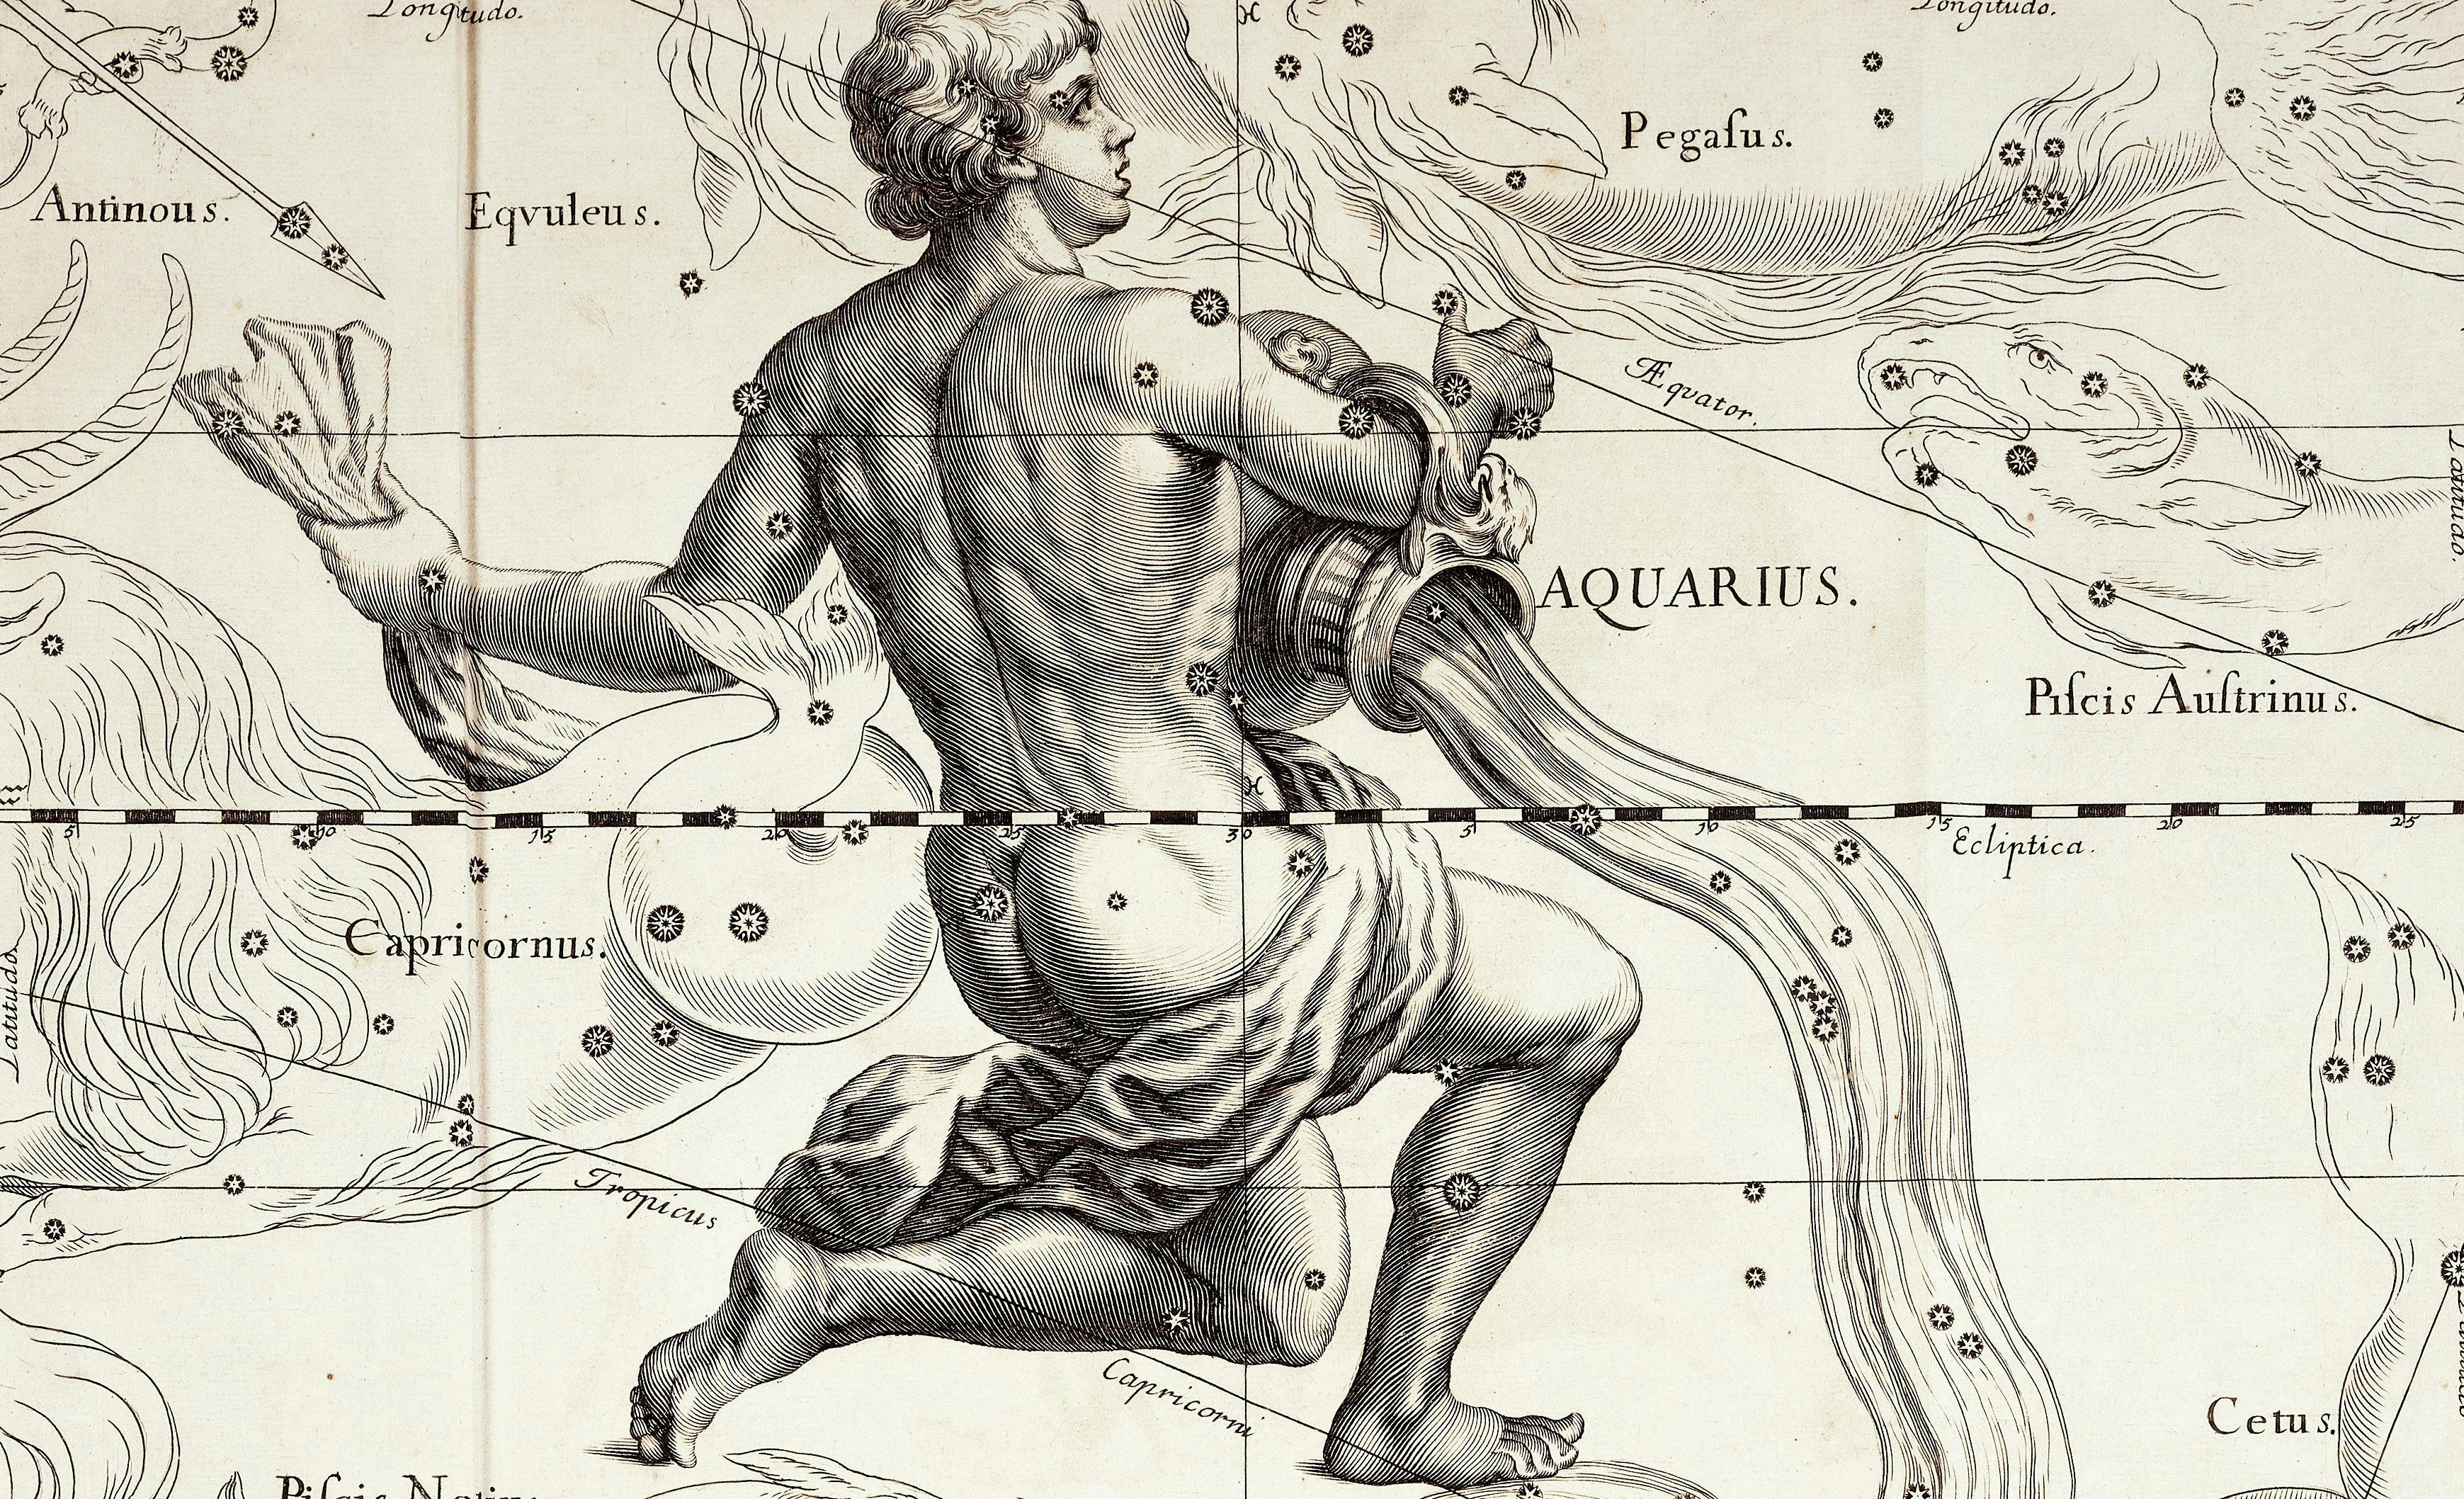 horizontal naked one person one man only science gdansk 1690 astronomy astrology astrology sign illustration and painting illustration technique johann hevelius star atlas firmamentum sobiescianum sive uranographia aquarius jug water spilling person human drawing art text